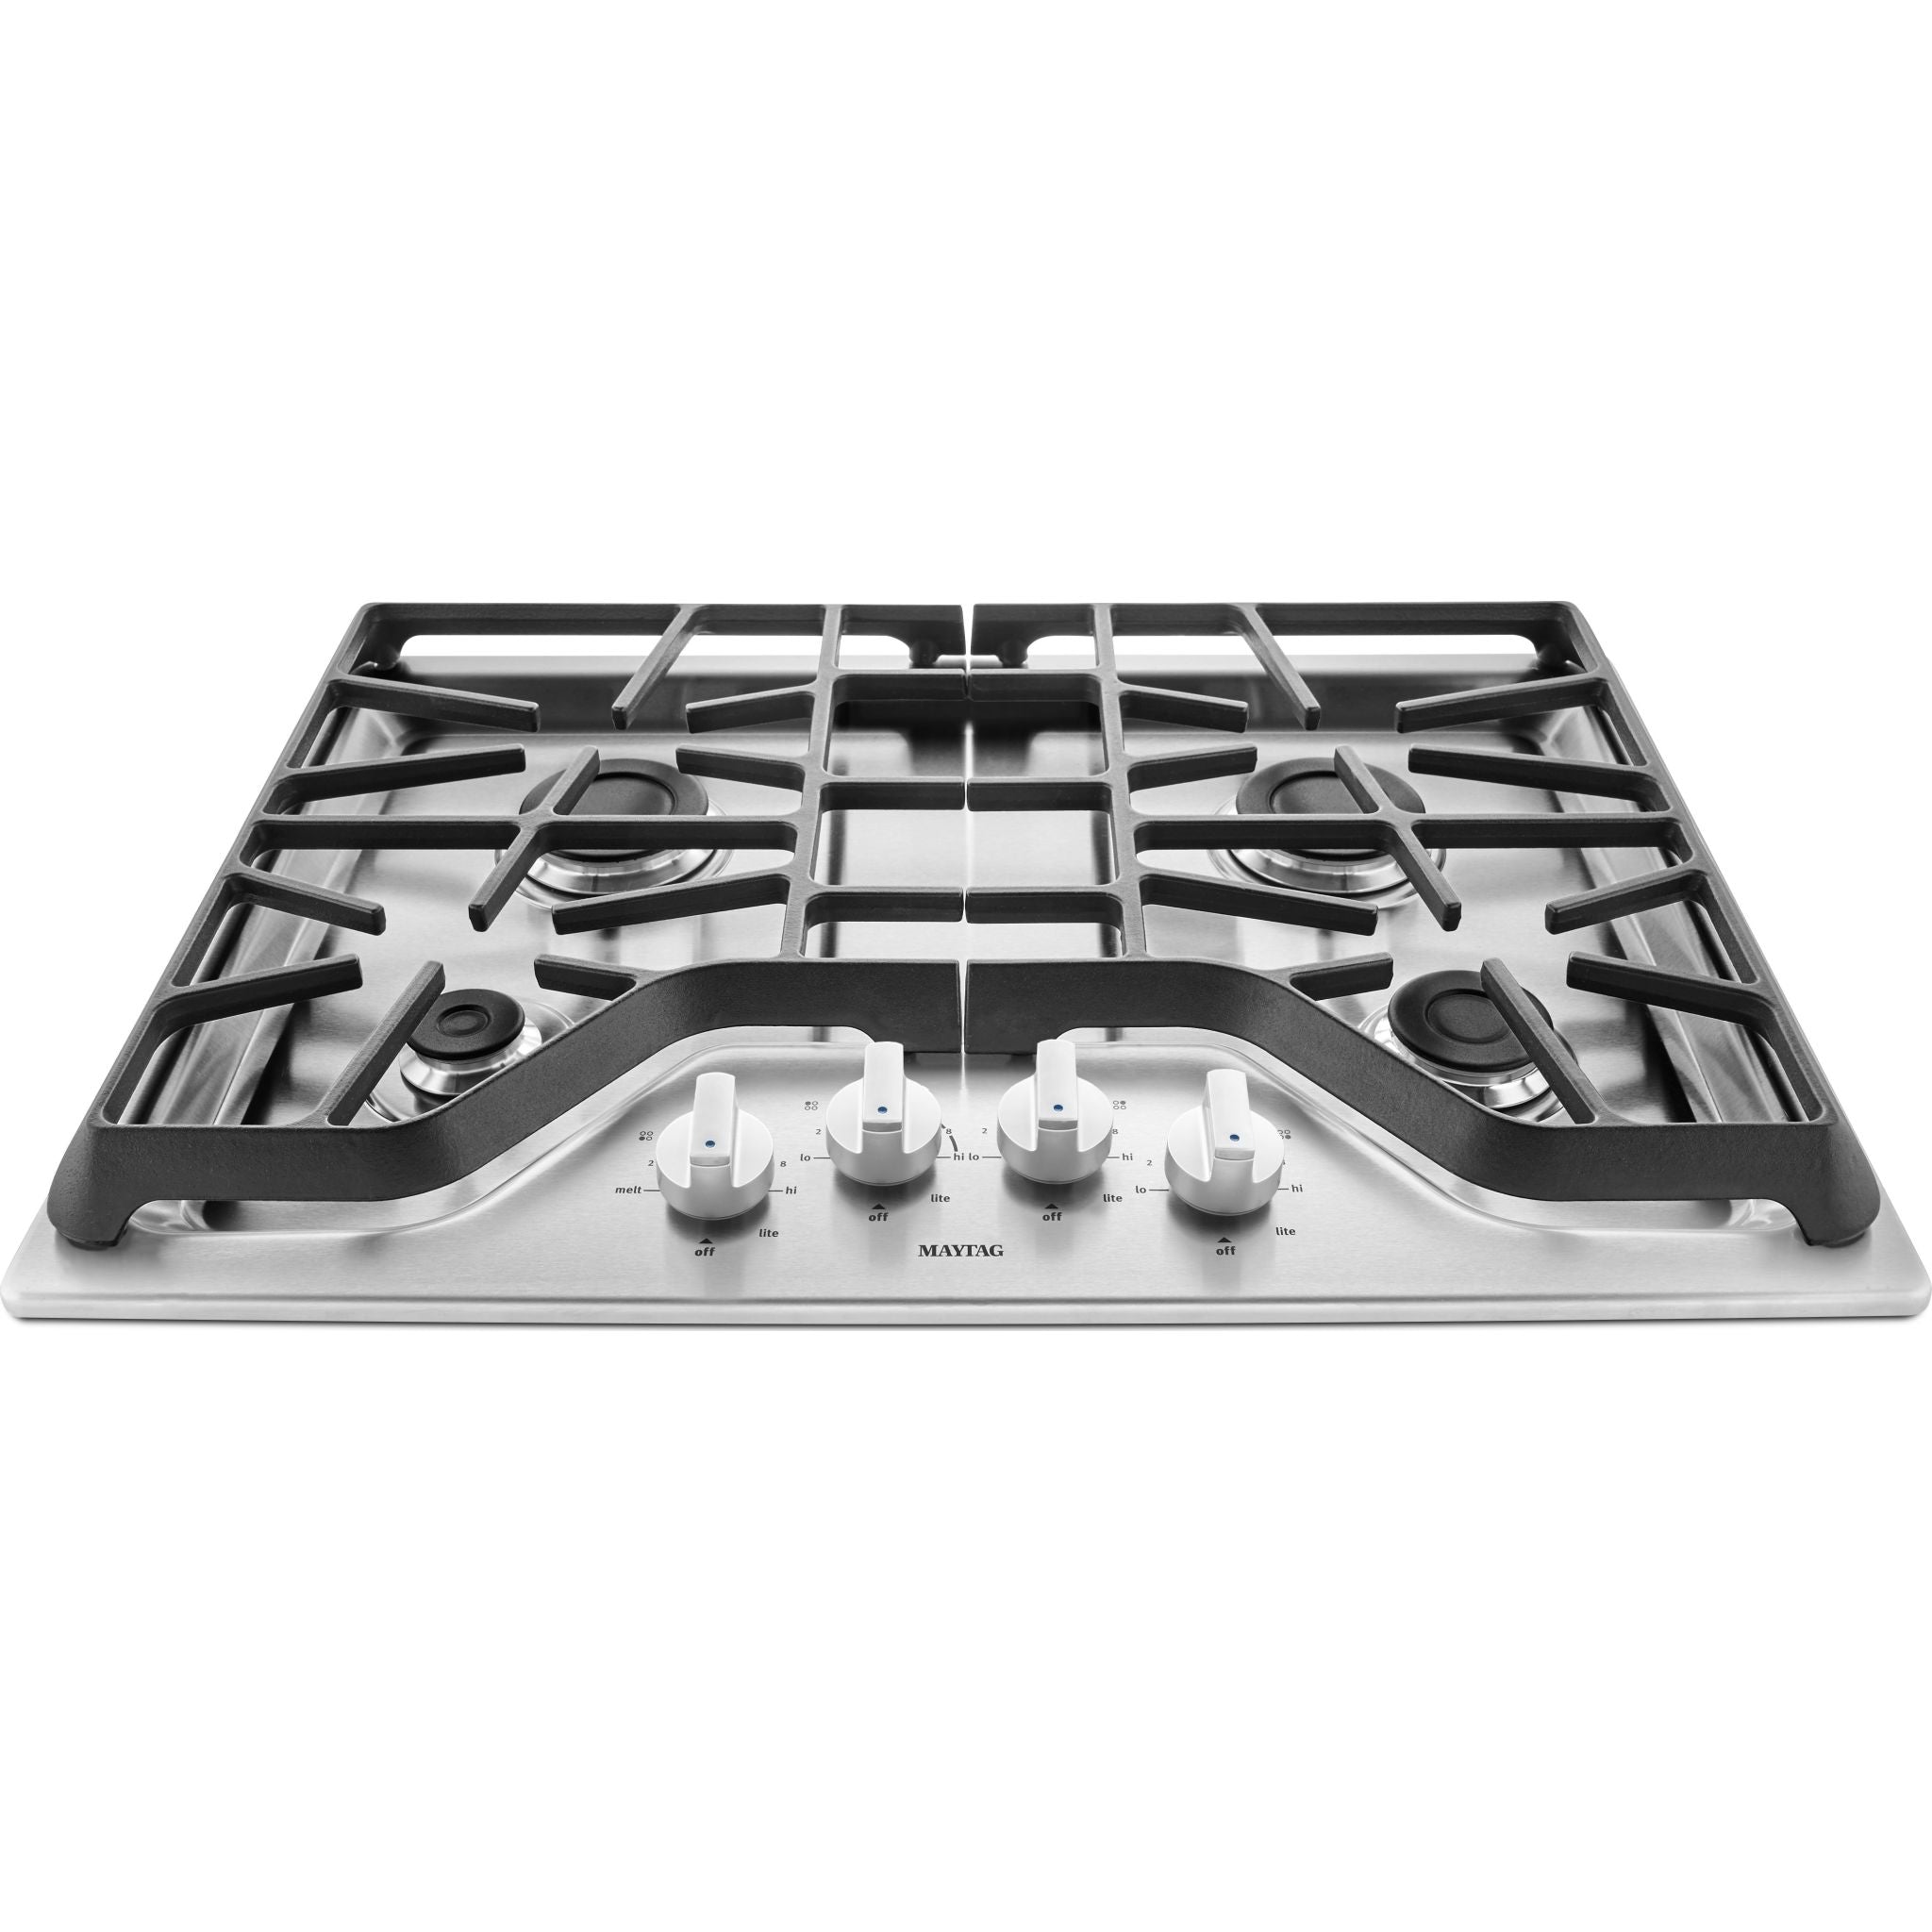 Maytag, Maytag 30" Gas Cooktop (MGC7430DS) - Stainless Steel